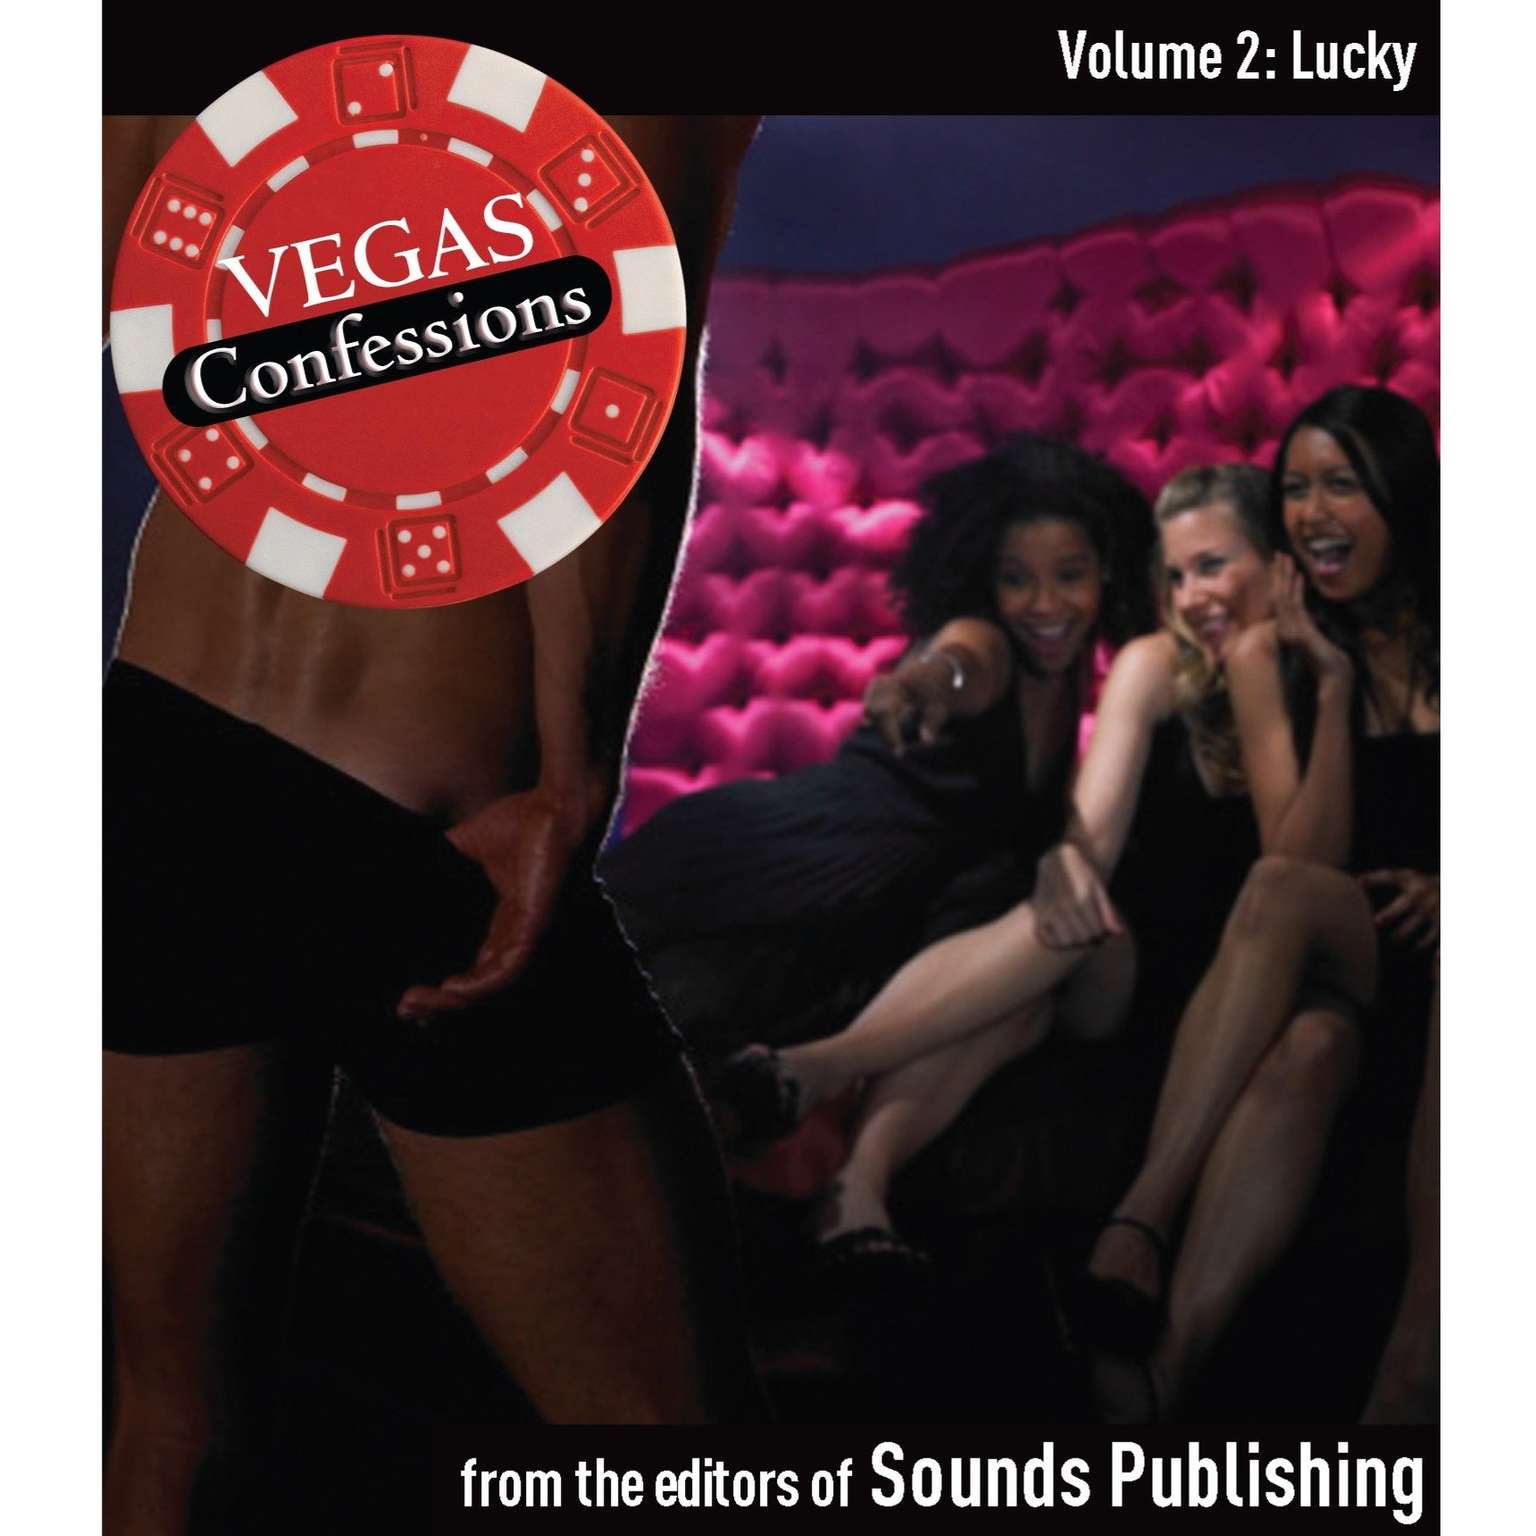 Vegas Confessions 2: Lucky Audiobook, by The Editors of Sounds Publishing